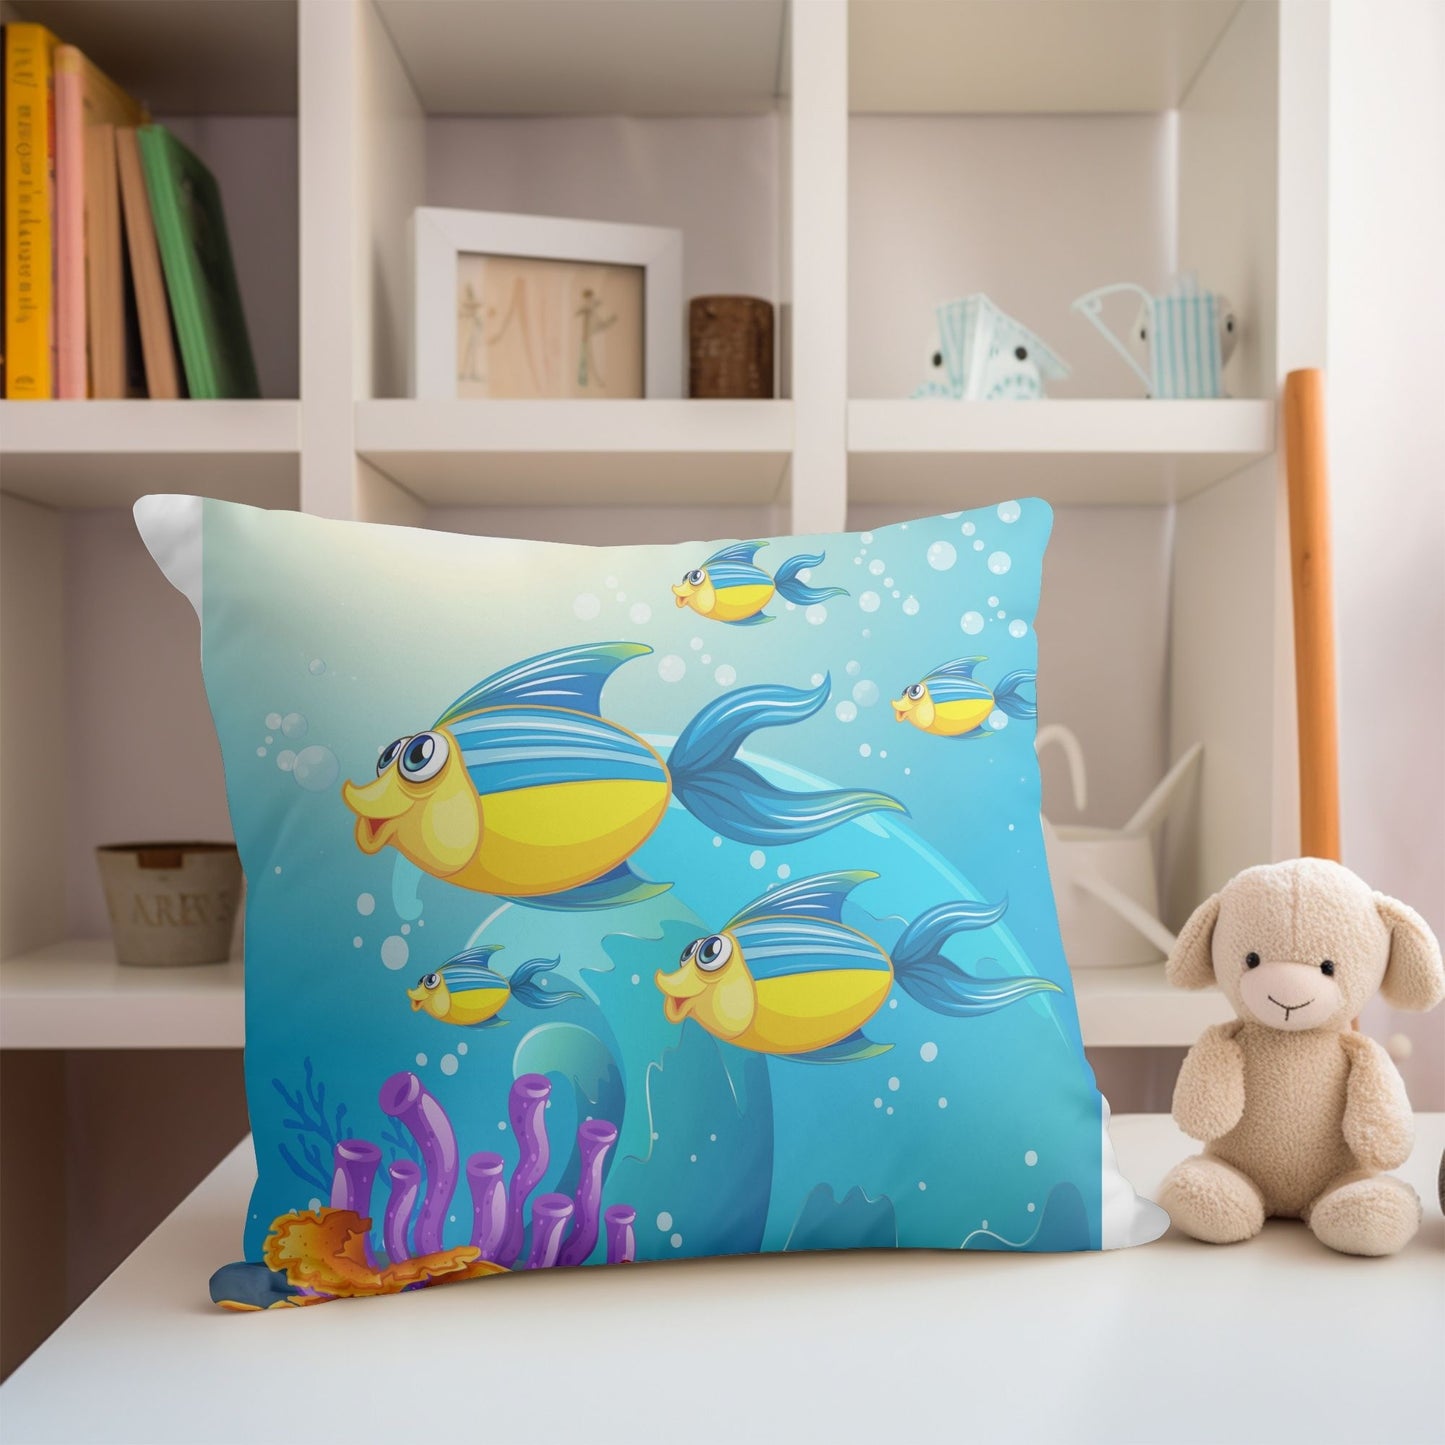 Imaginative kids pillow featuring beautiful fishes for dreamy nights.